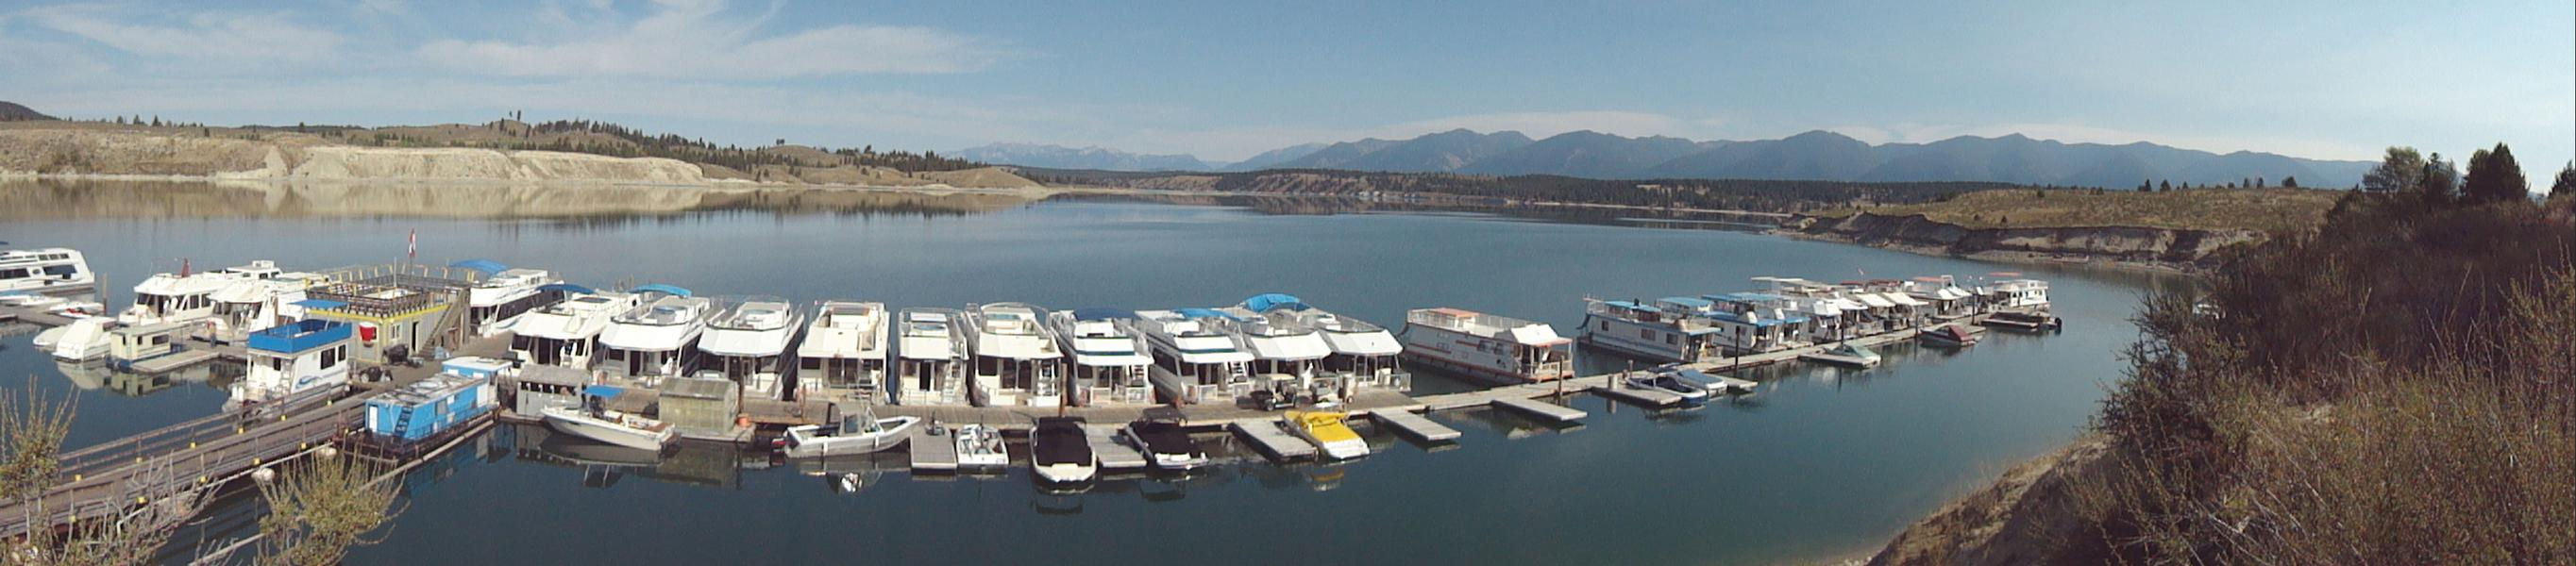 Choose from a fleet of comfortable houseboats for your lake vacation